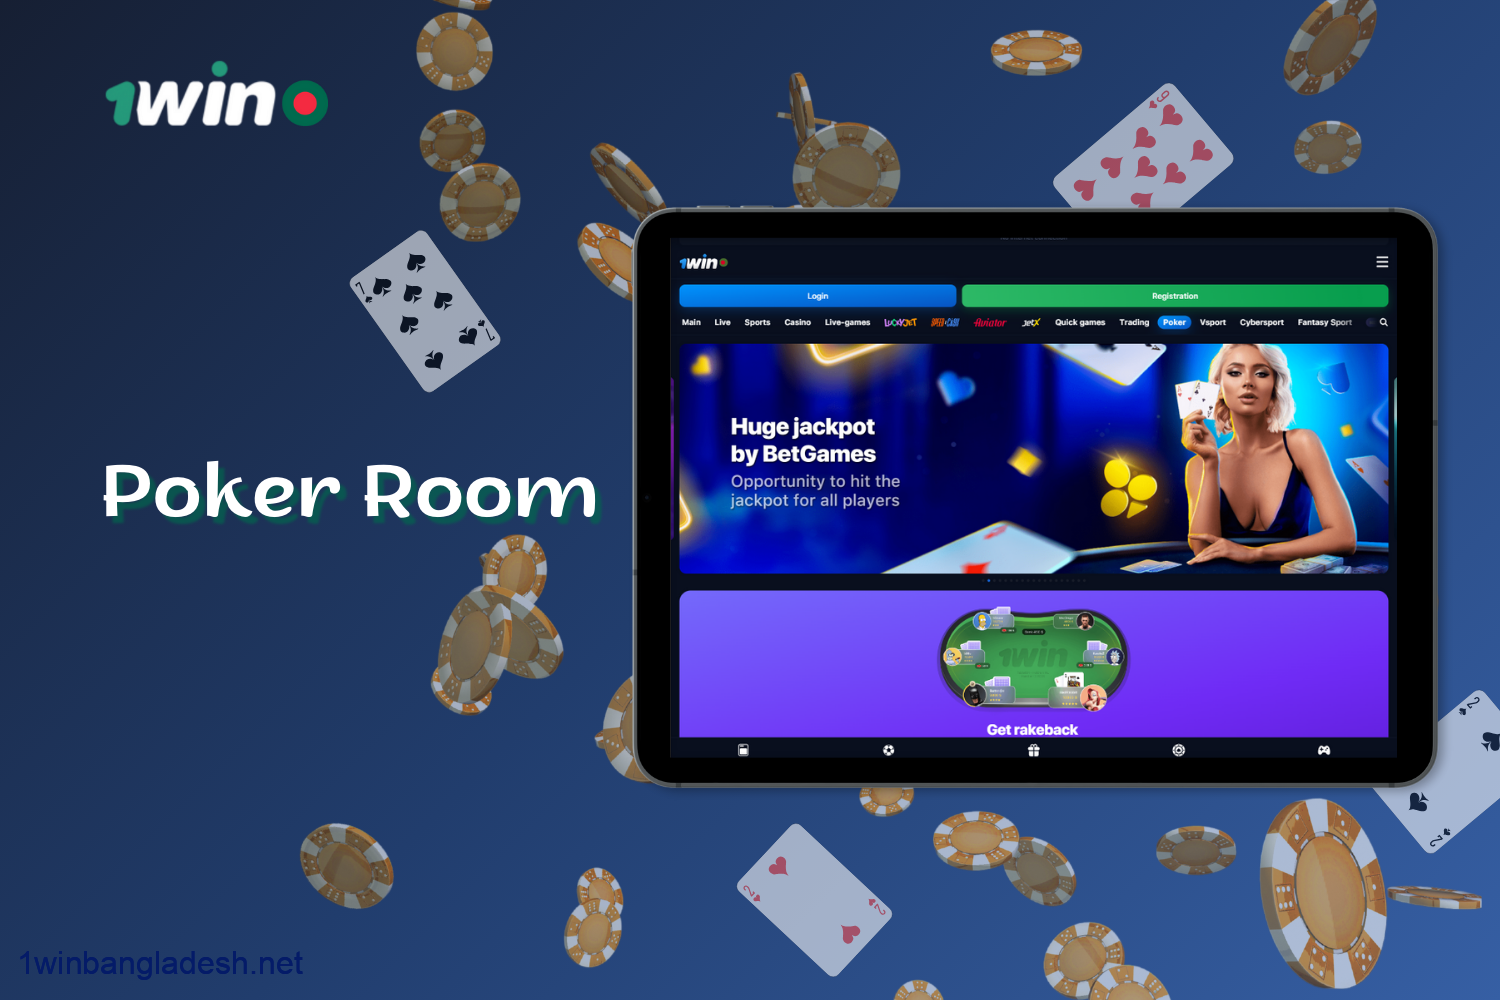 1win offers players from Bangladesh a wide range of Poker rooms in the Poker section